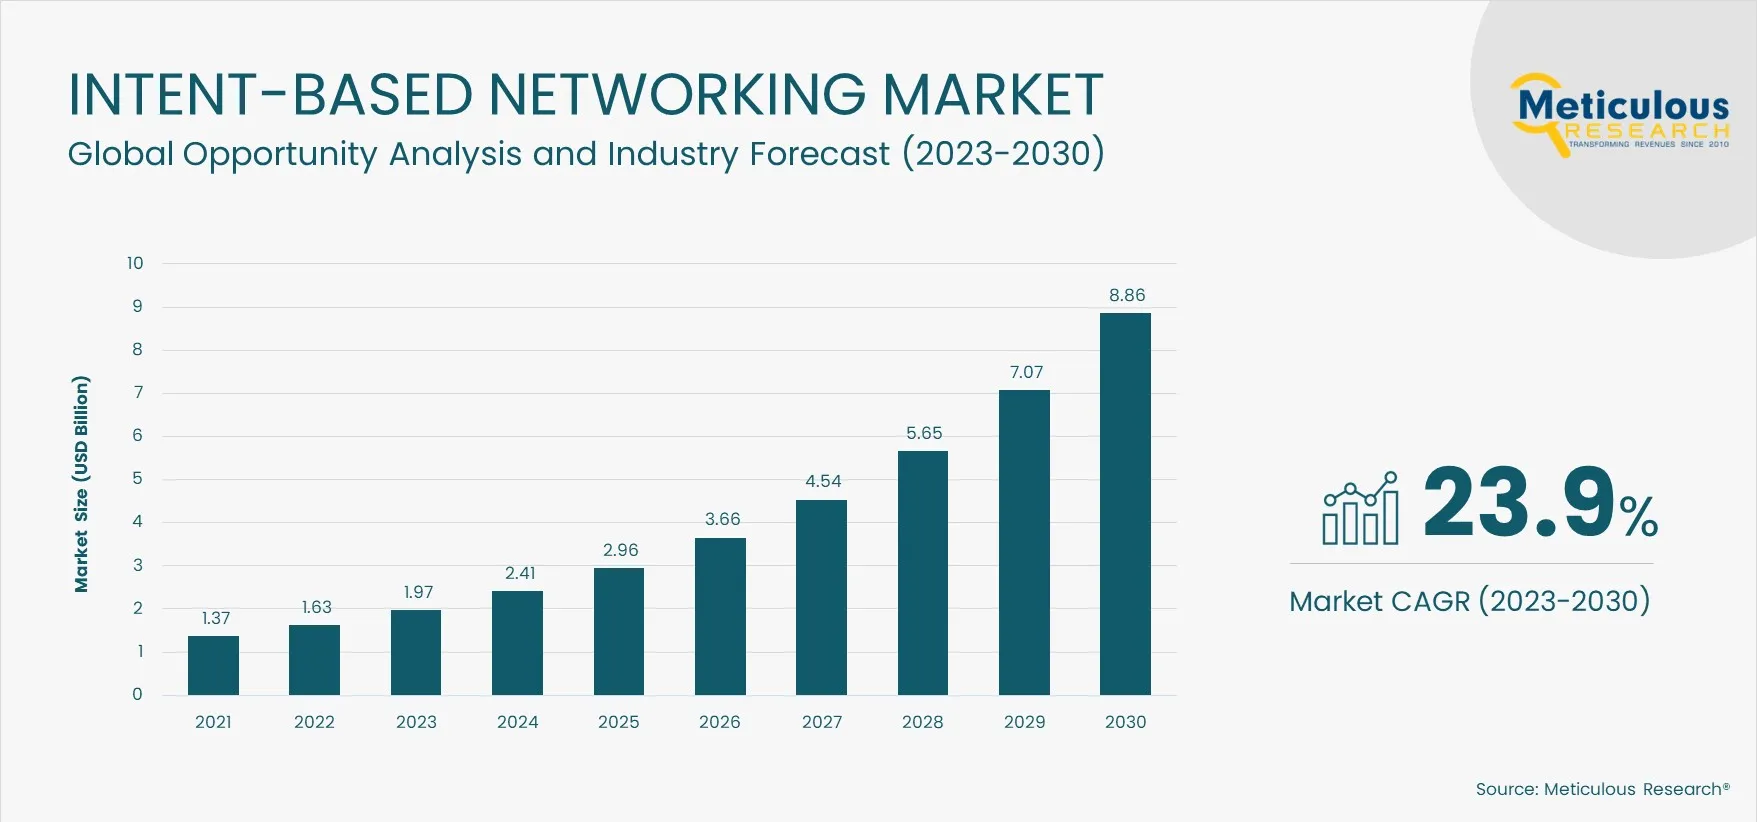 Intent-based Networking Market Bar Chart